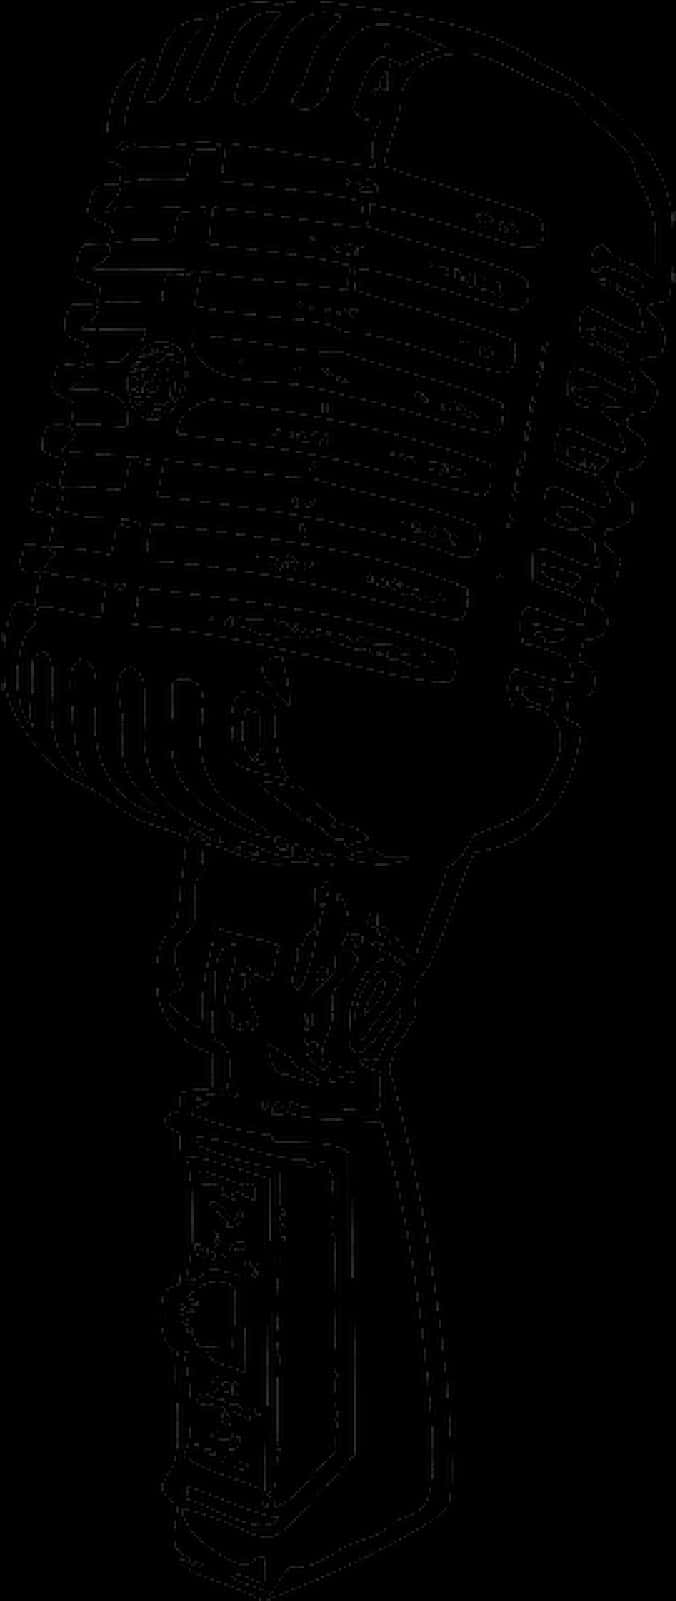 Vintage Microphone Silhouette PNG image